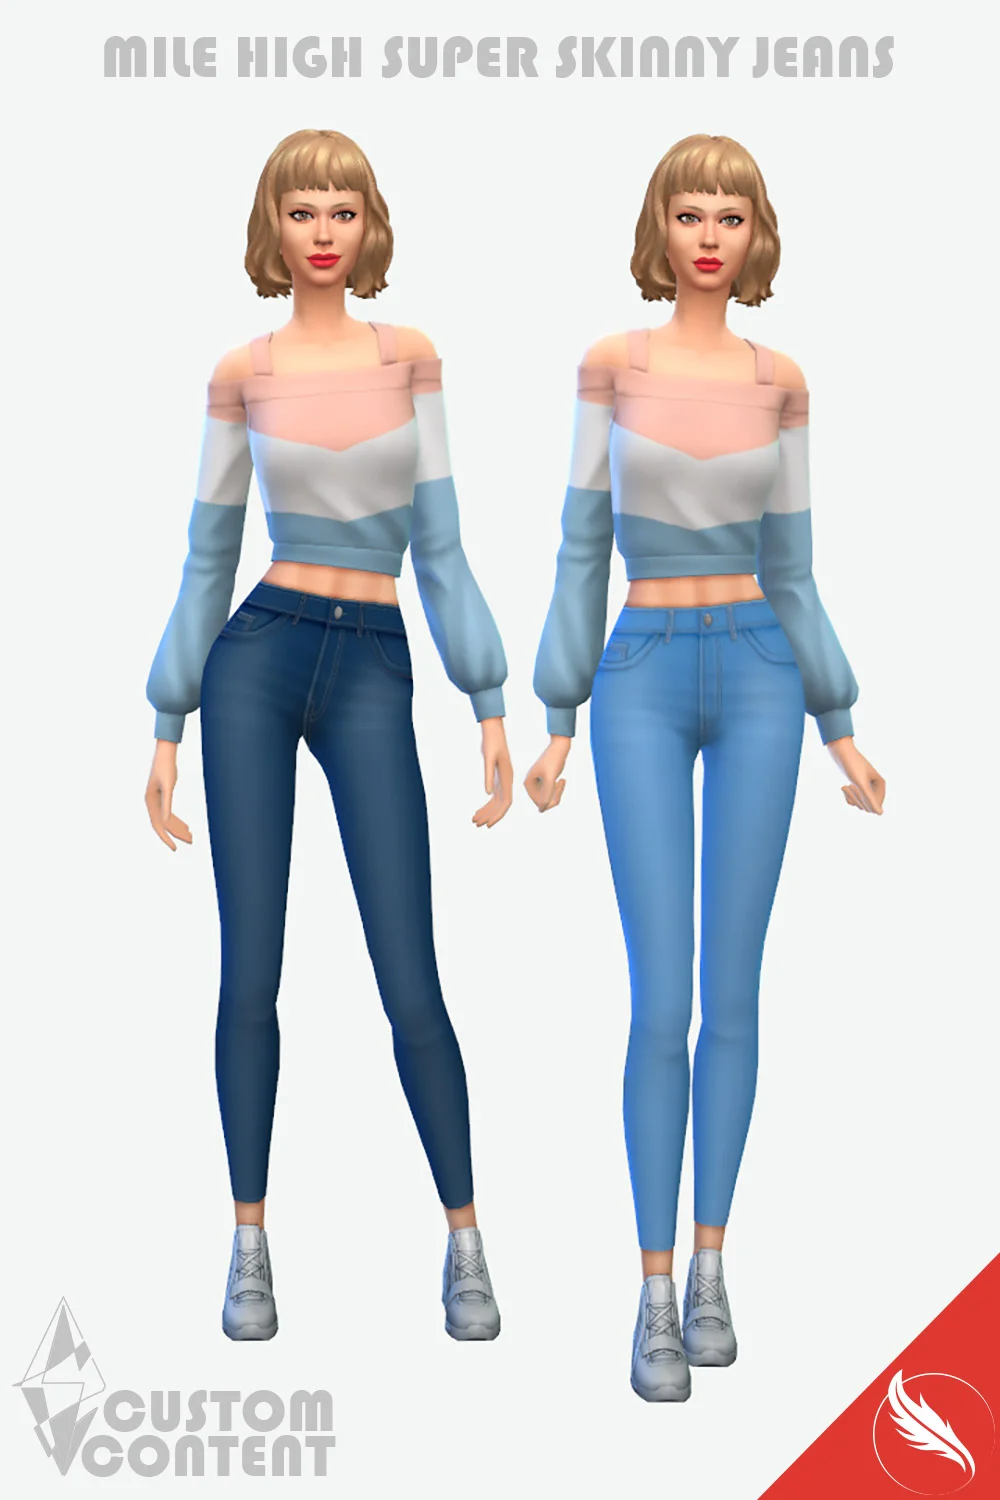 The sims 4 Skinny Jeans CC